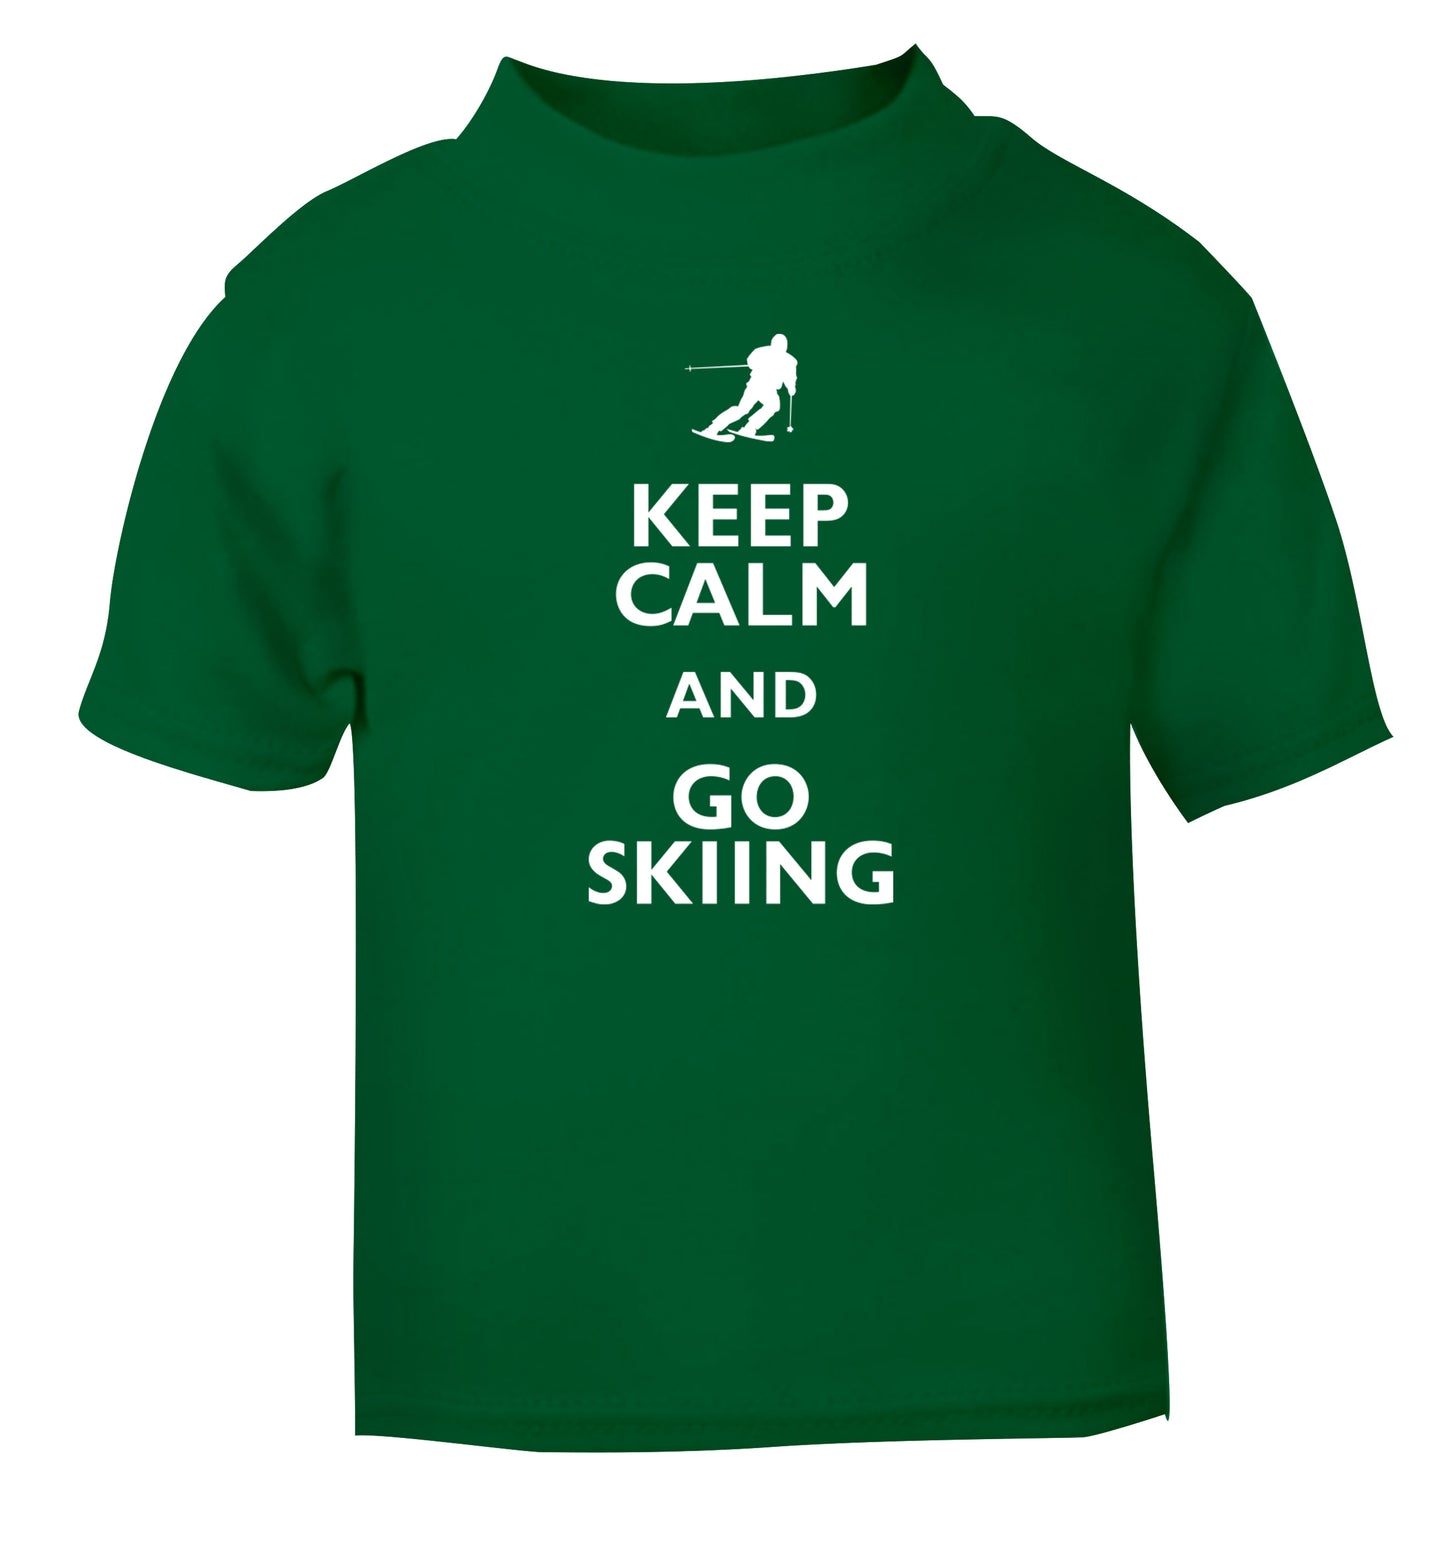 Keep calm and go skiing green Baby Toddler Tshirt 2 Years